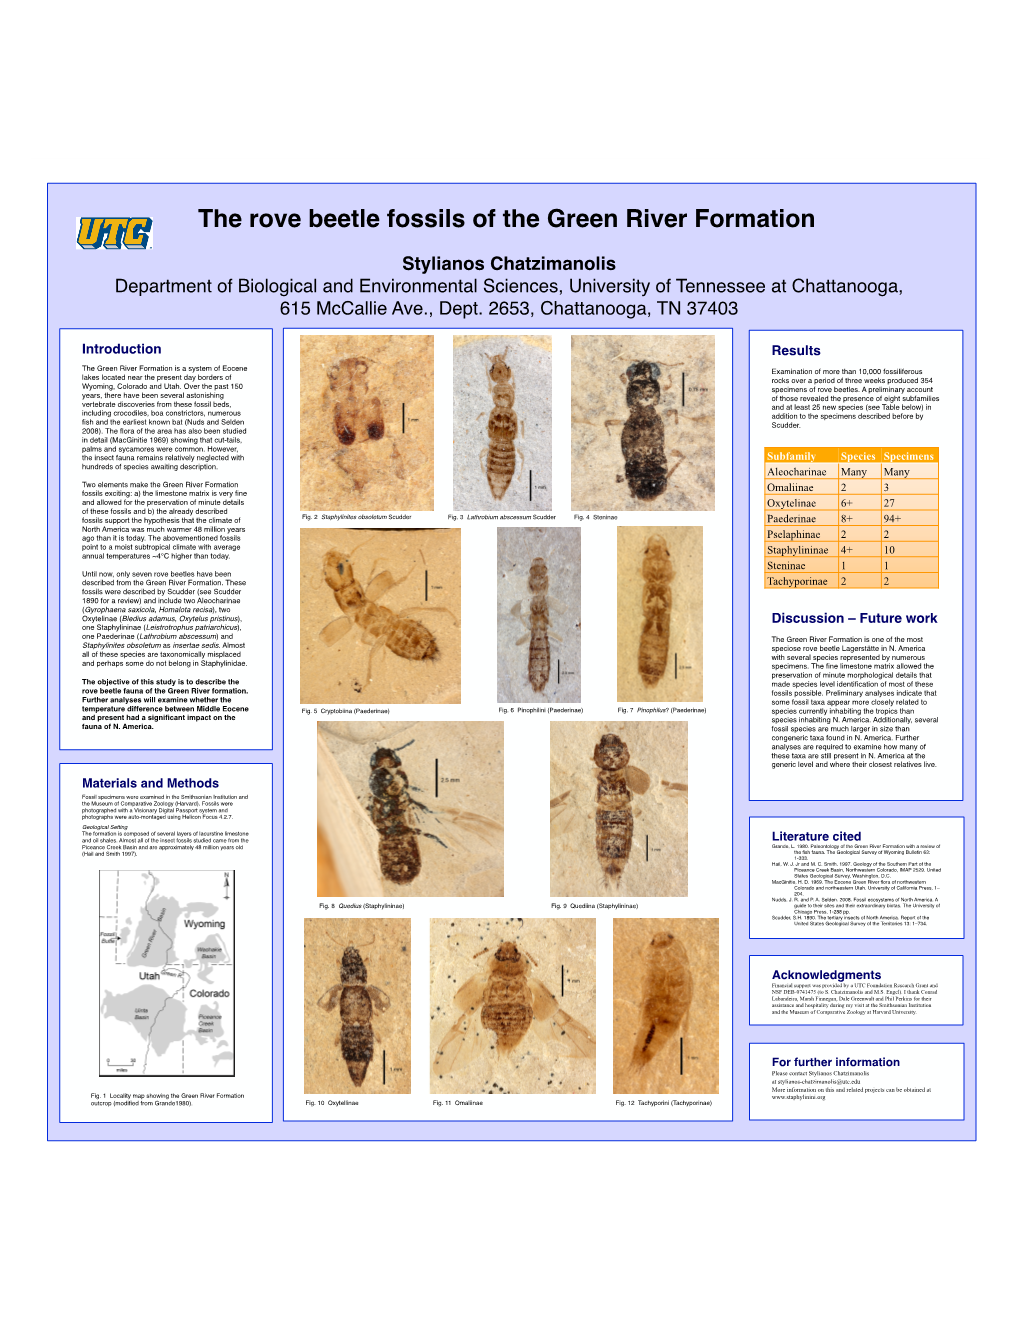 The Rove Beetle Fossils of the Green River Formation